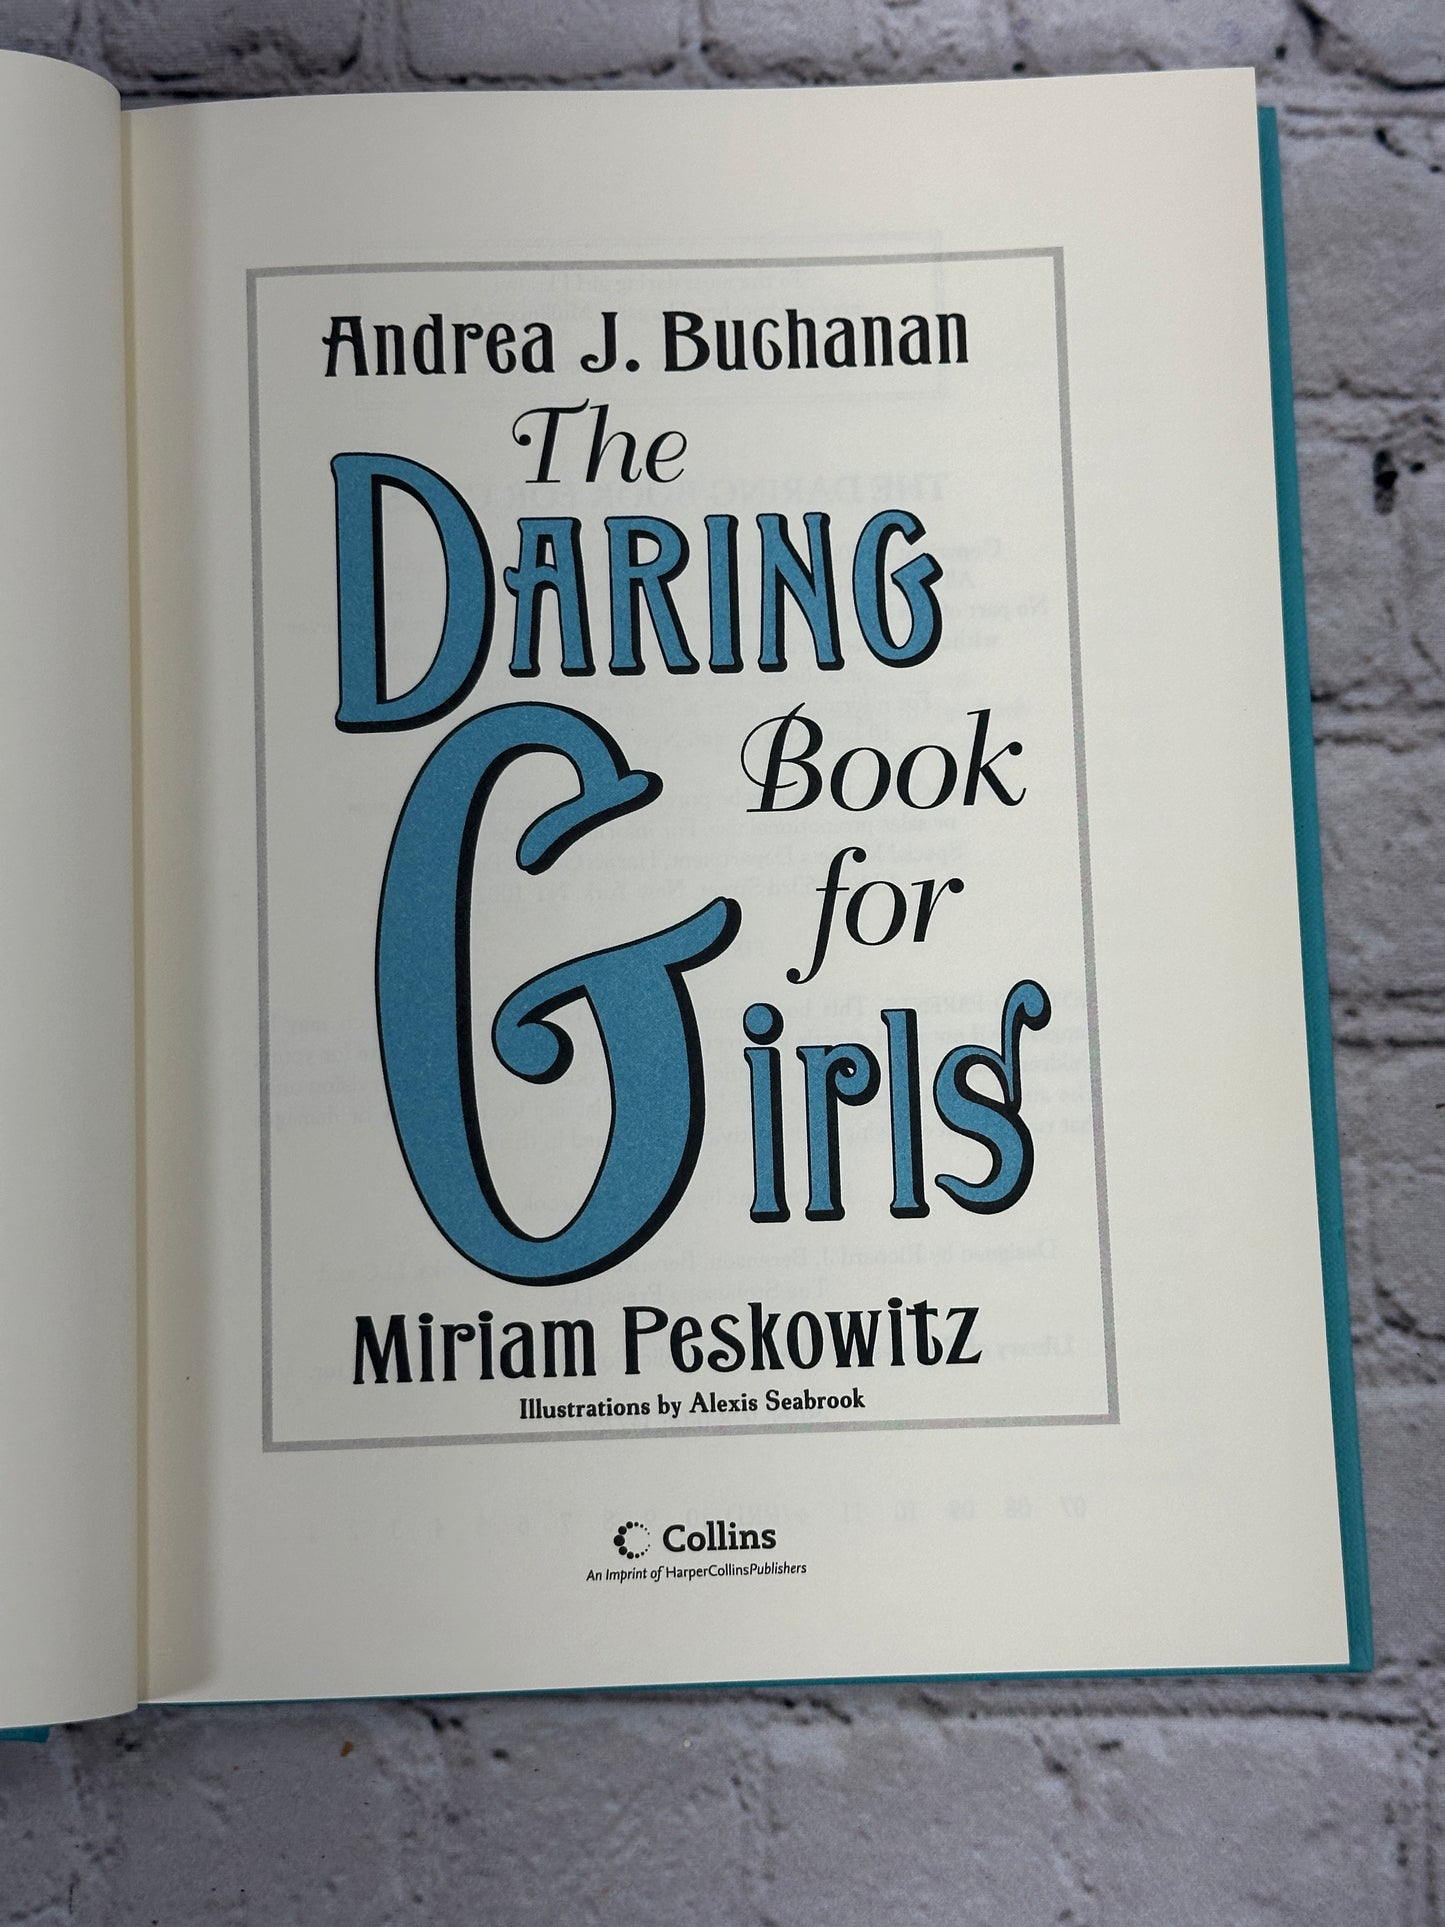 The Darling Book For Girls by Miriam Peskowitz [2007]